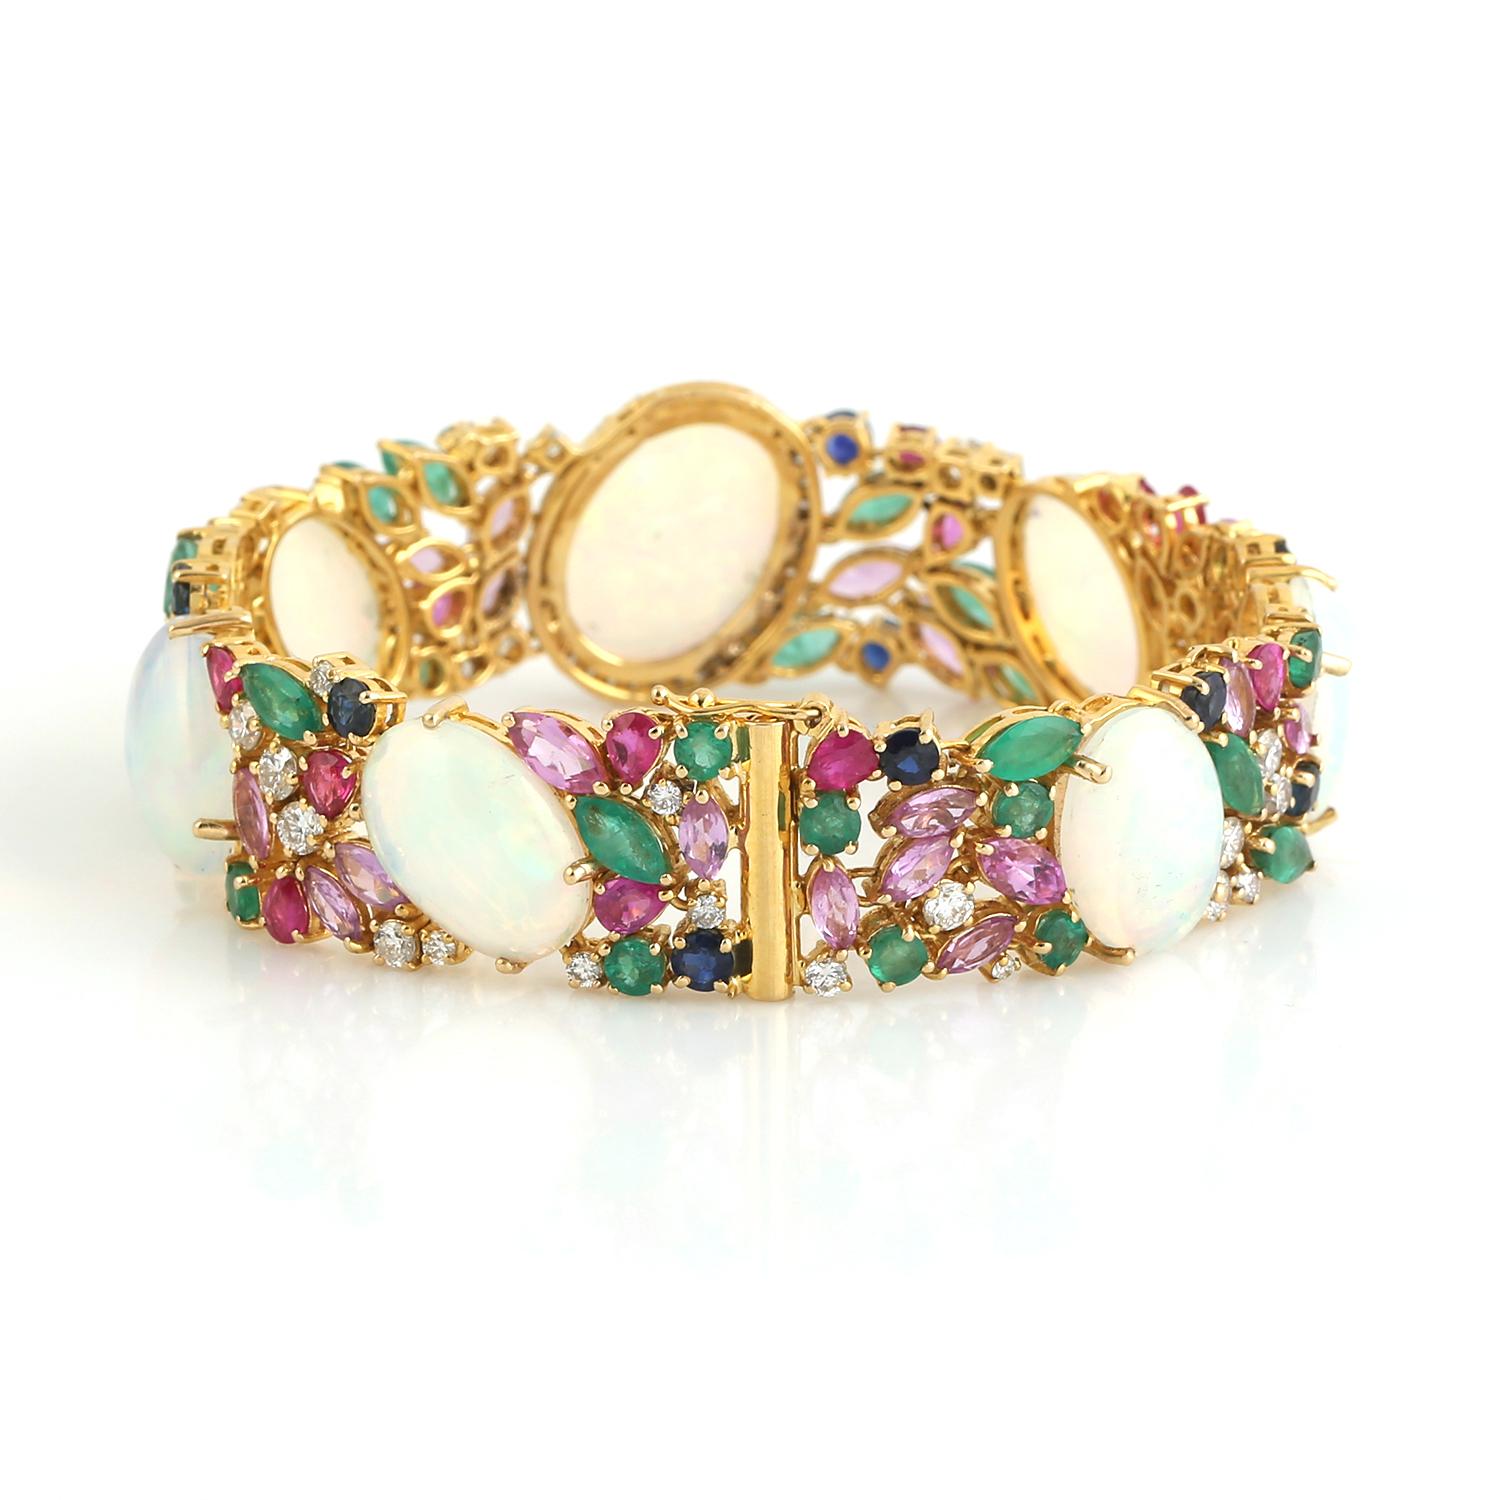 Contemporary Multi Gemstone Bracelet With Opal & Diamonds Made In 18k Yellow Gold For Sale